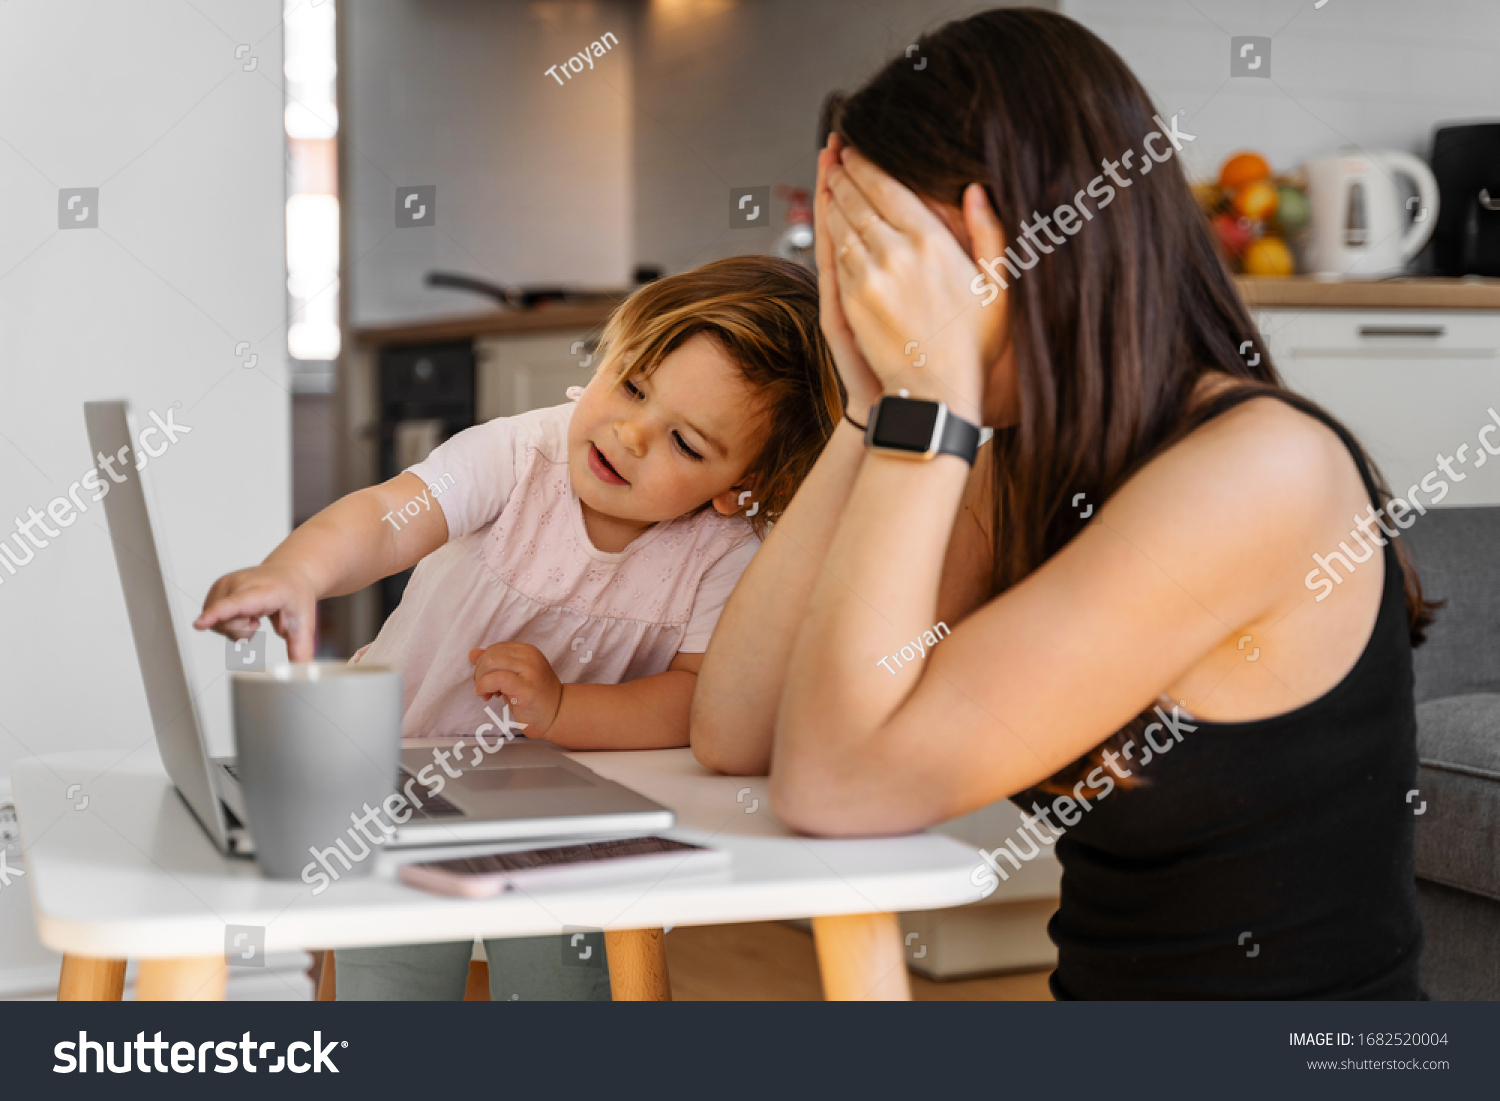 Mother working from home with baby toddler. Crying child and stressed woman. Stay home #1682520004